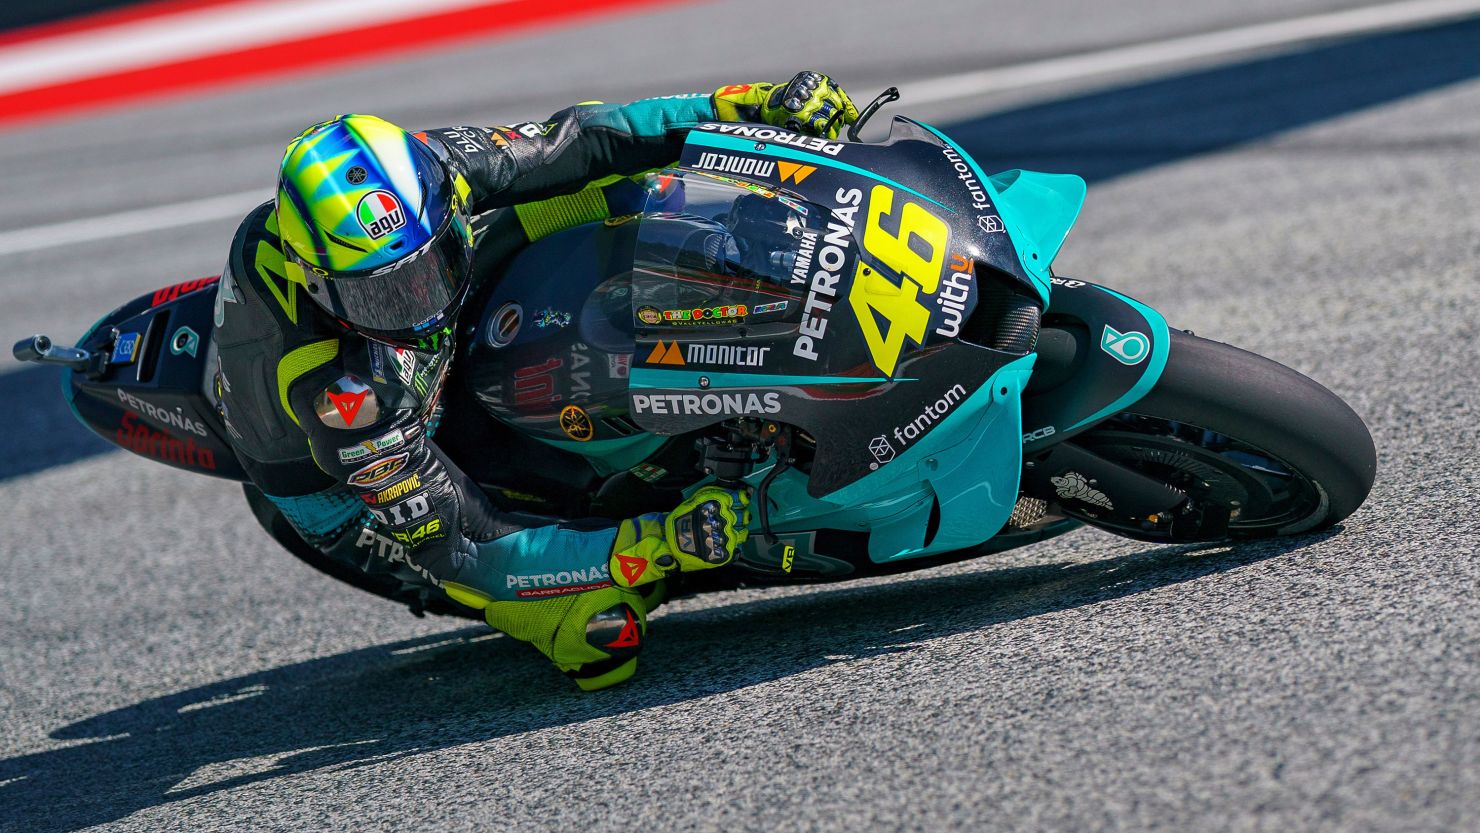 Italy's Valentino Rossi rides at the MotoGP of Styria during free practice at the Red Bull Ring on August 6, 2021 in Spielberg, Austria. 